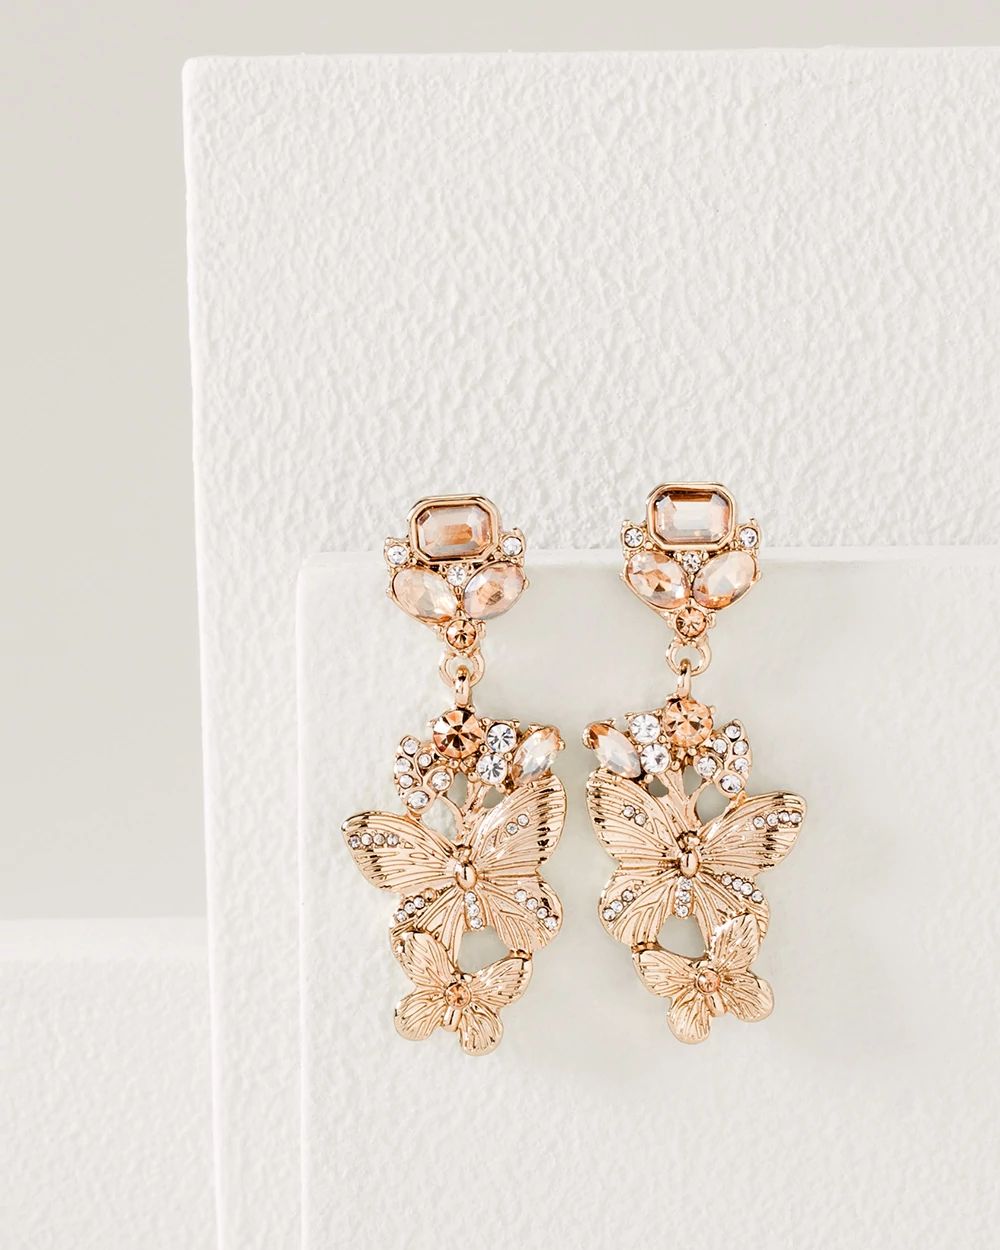 Goldtone Butterfly Statement Earrings click to view larger image.